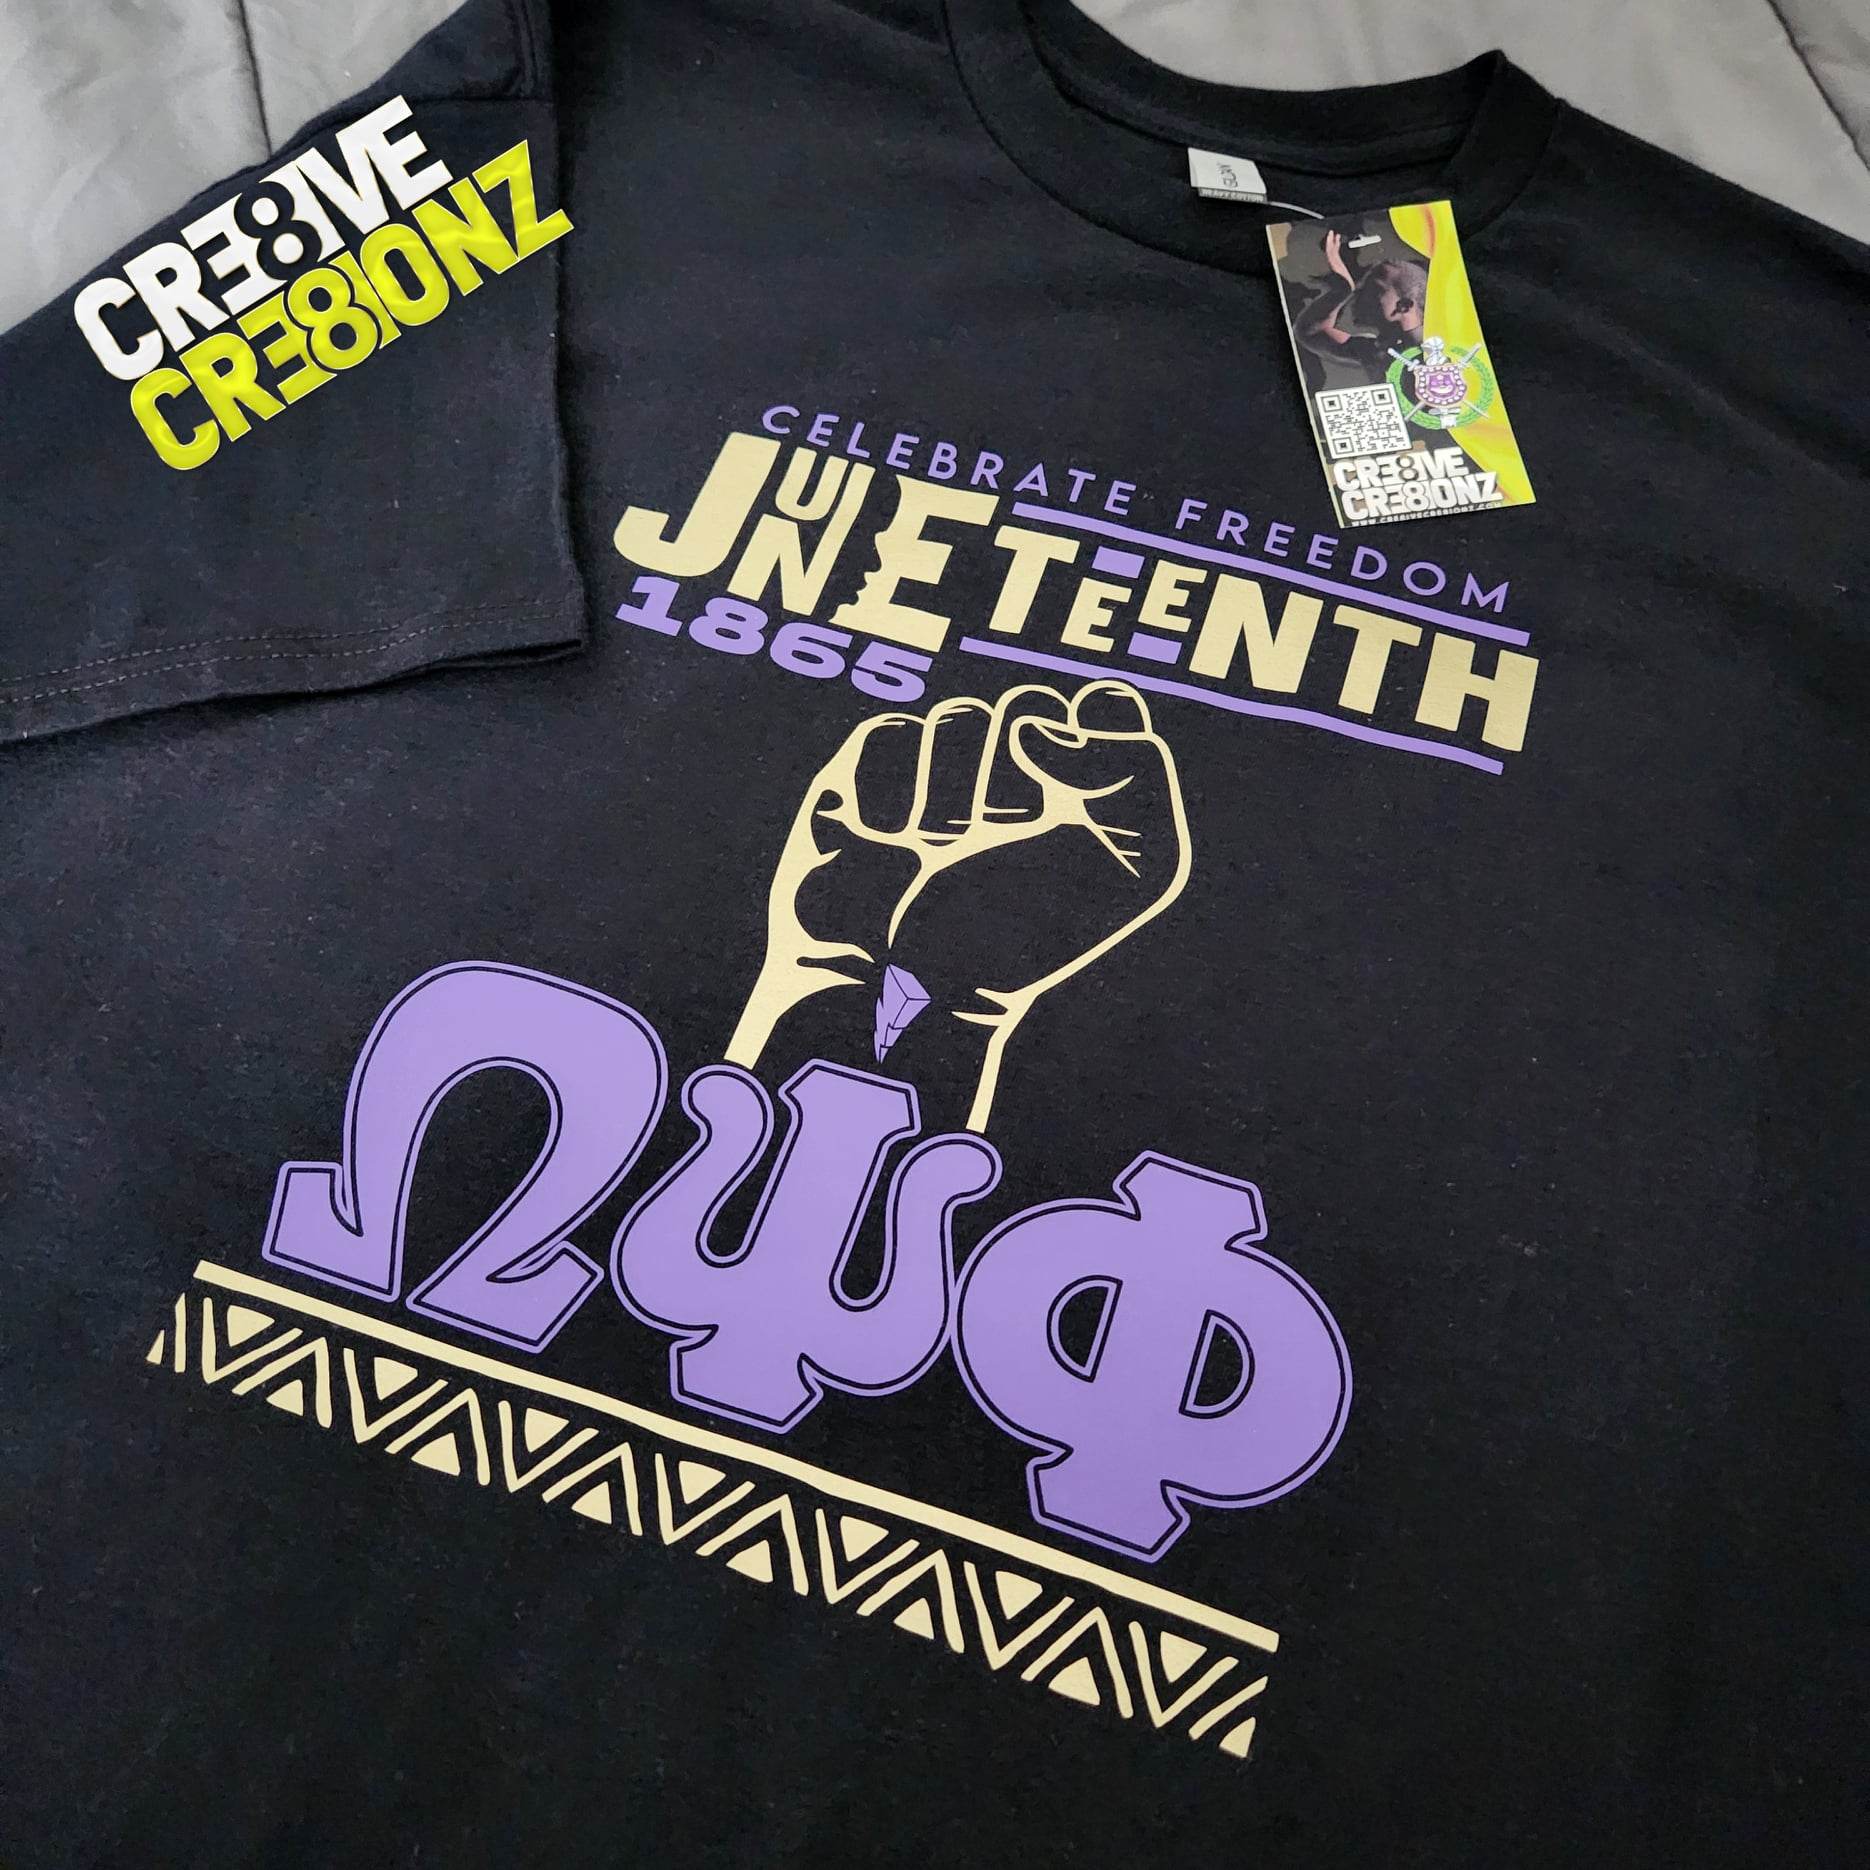 Juneteenth Omega Shirt - Cre8ive Cre8ionz